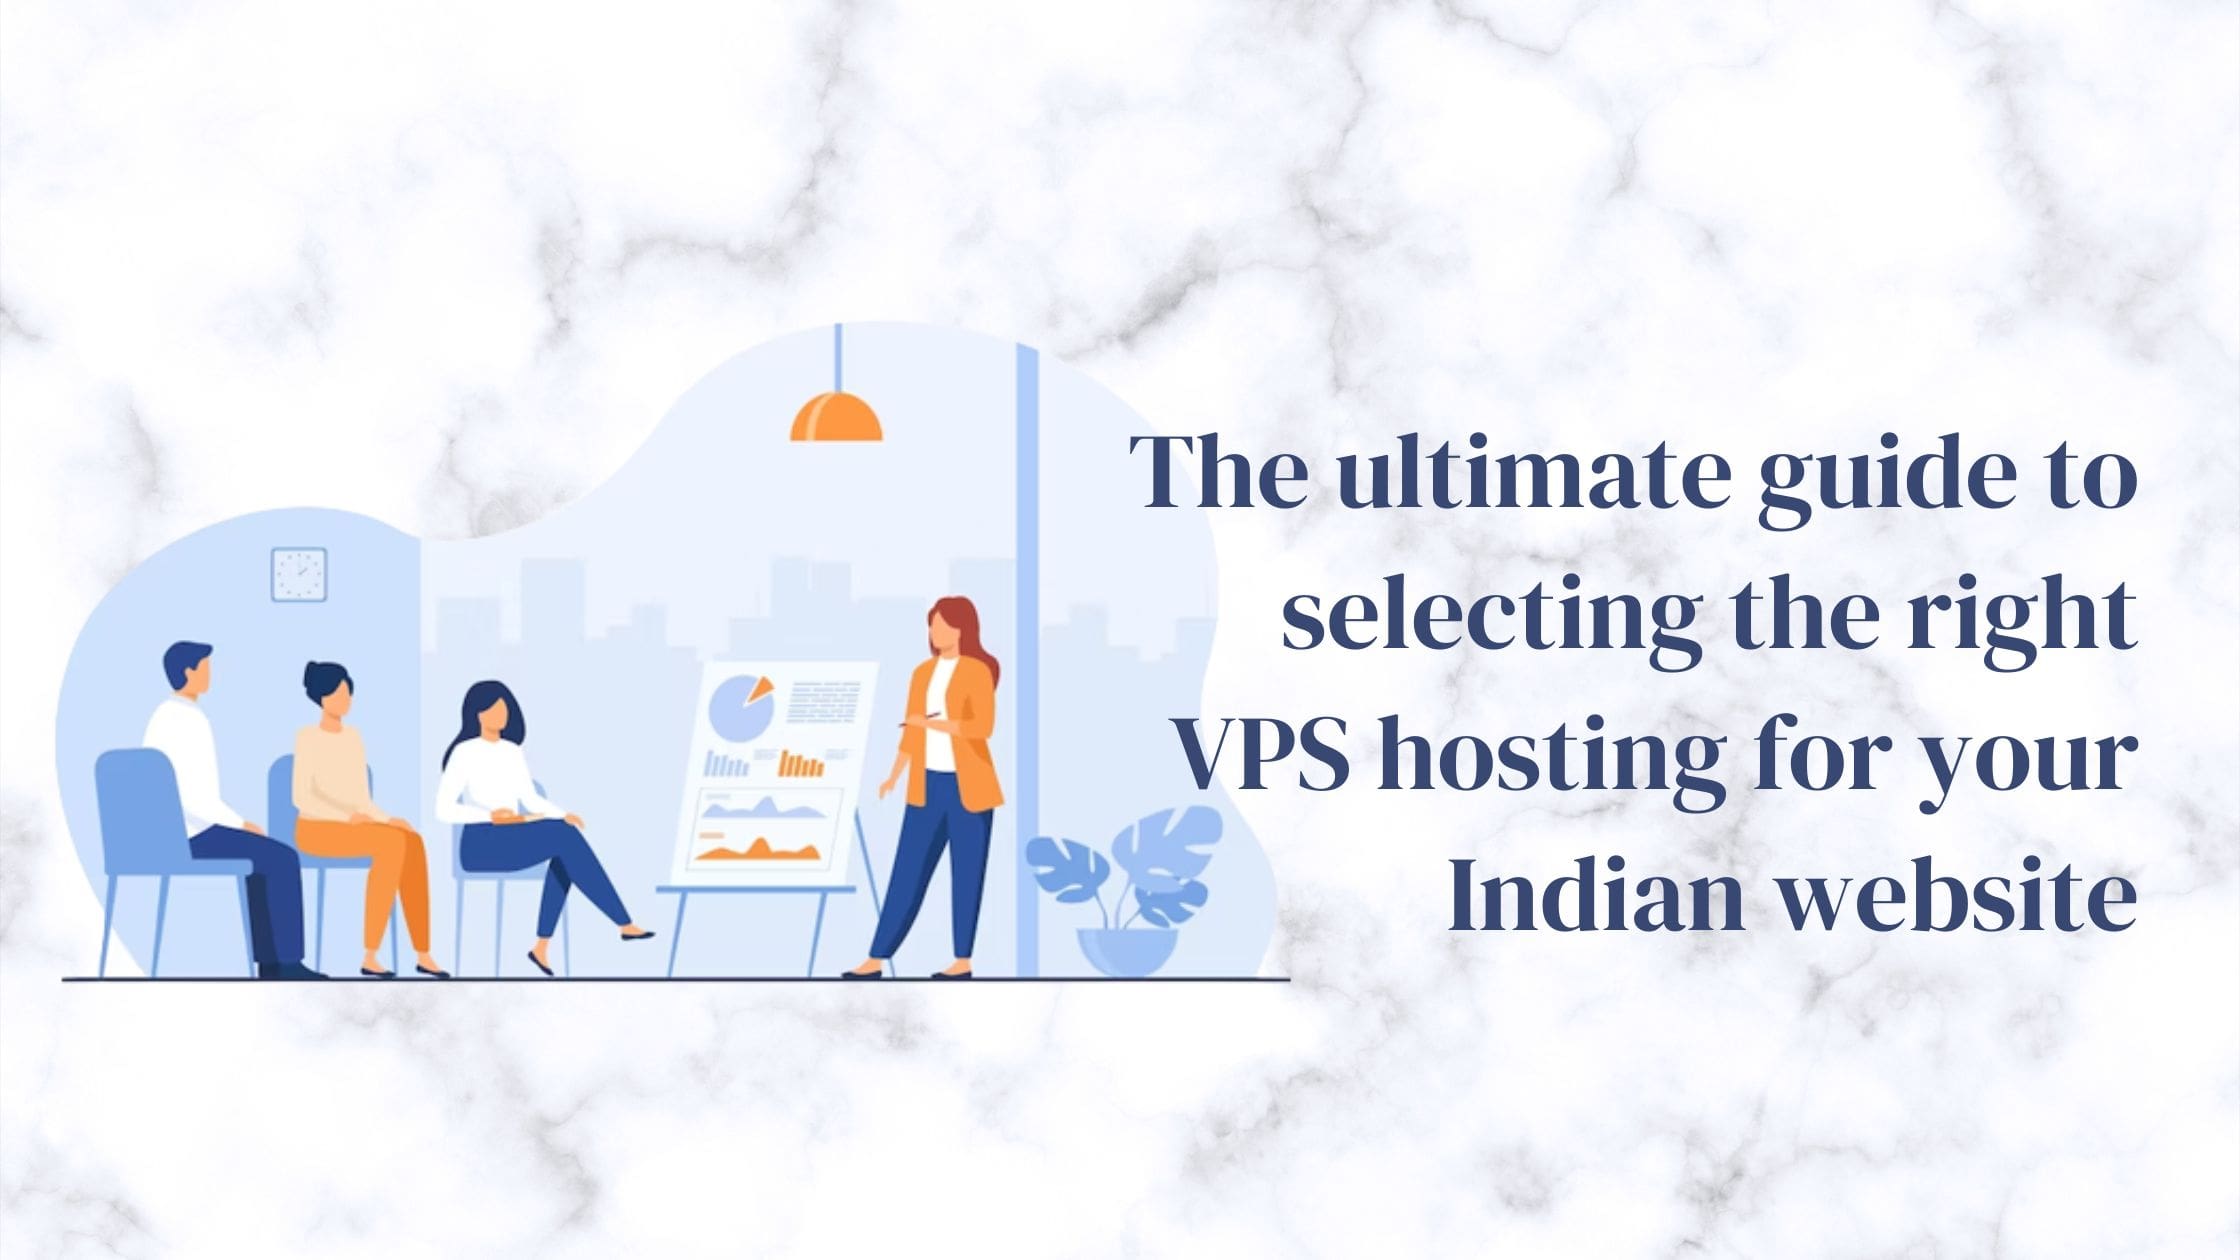 The ultimate guide to selecting the right VPS hosting for your Indian website